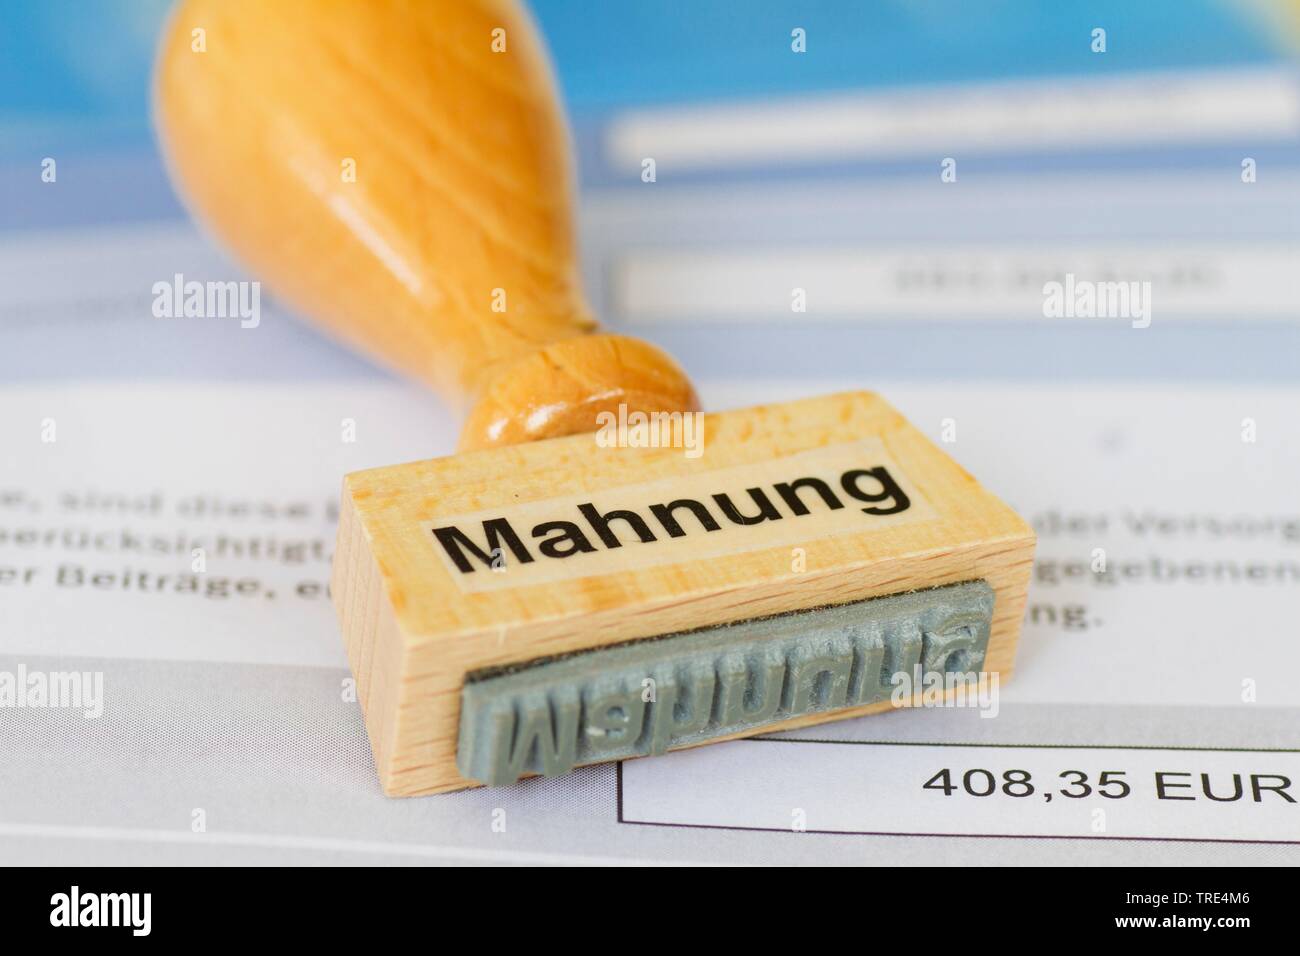 stamp lettering Mahnung, exhortation, Germany Stock Photo